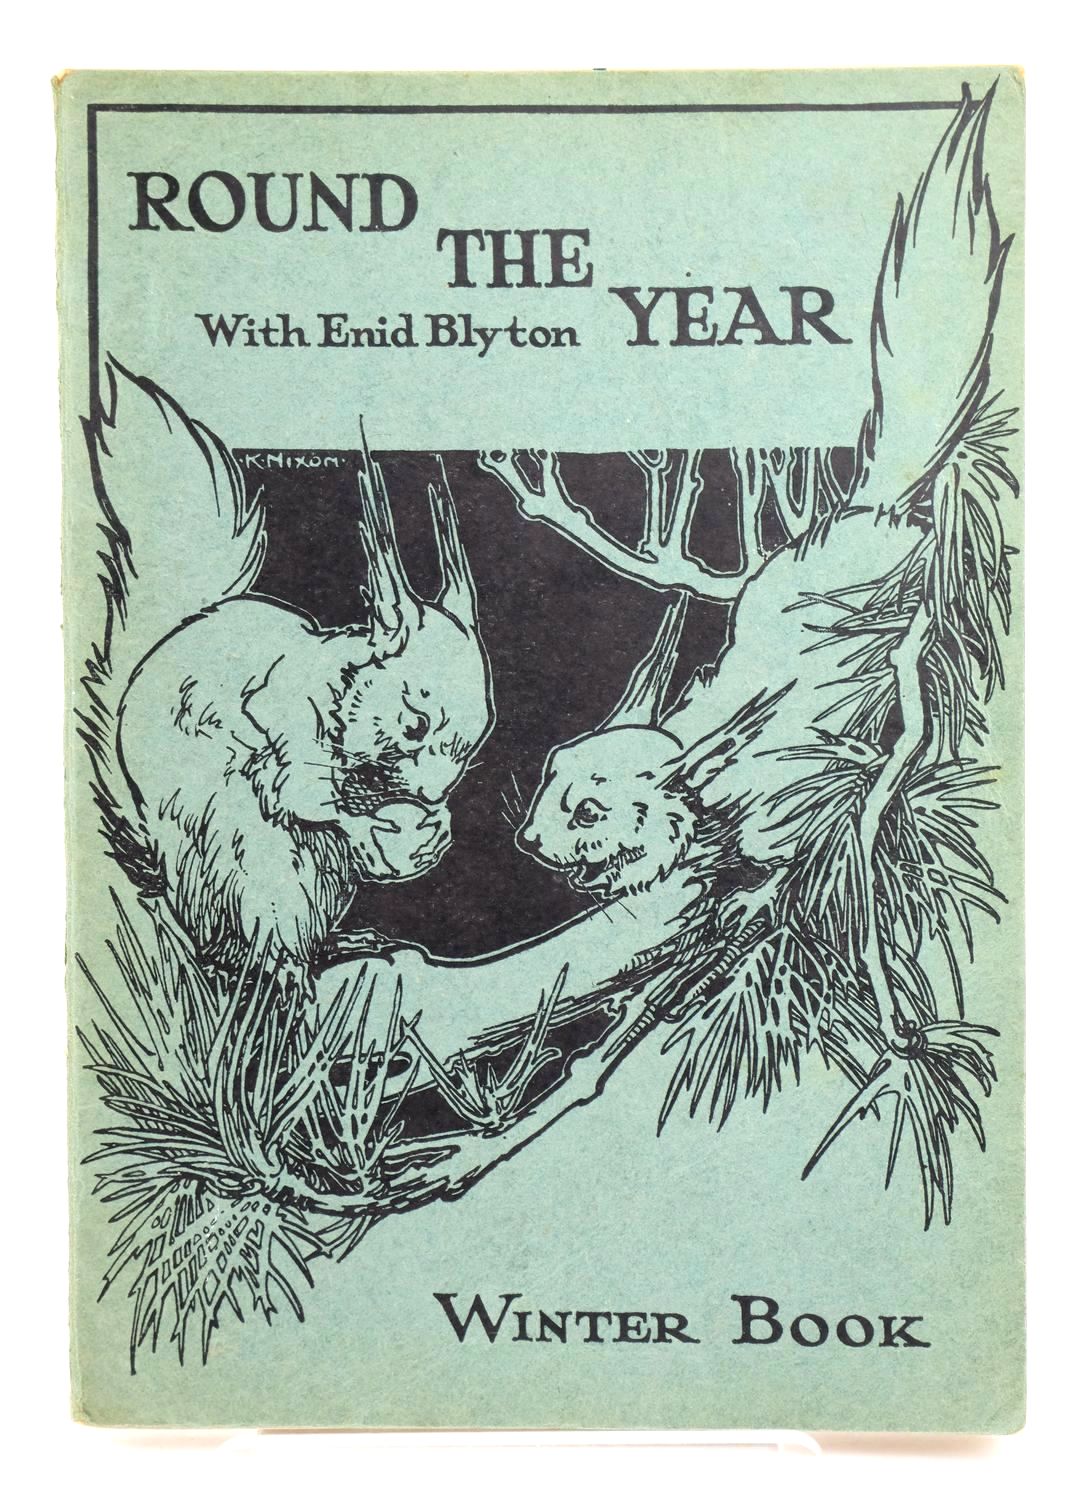 Photo of ROUND THE YEAR WITH ENID BLYTON - WINTER BOOK written by Blyton, Enid published by Evans Brothers Limited (STOCK CODE: 1318798)  for sale by Stella & Rose's Books